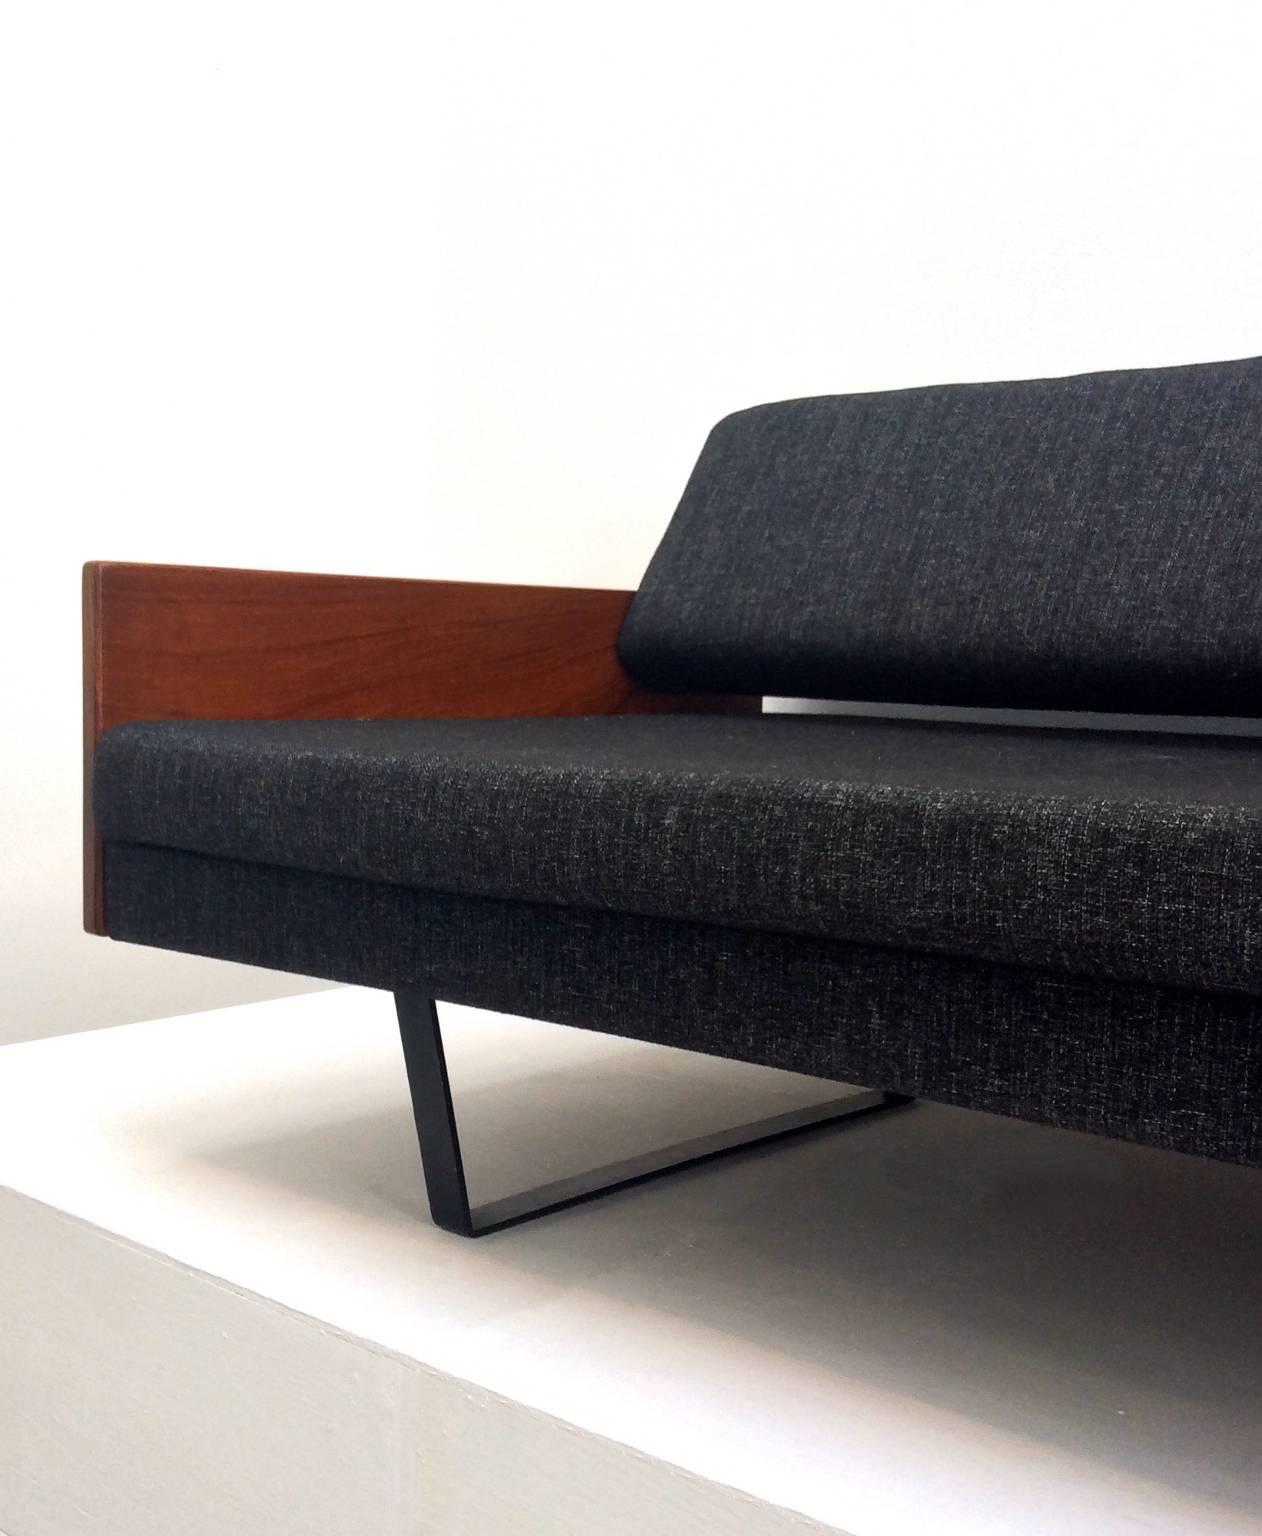 Minimal daybed or sofa, by Robin Day, (1915-2010).

Elegant slim design with teak arms and adjustable back-rest, which can be turned away from the seat to create a single bed. Newly upholstered in dark grey wool, with black Pirelli webbing, to